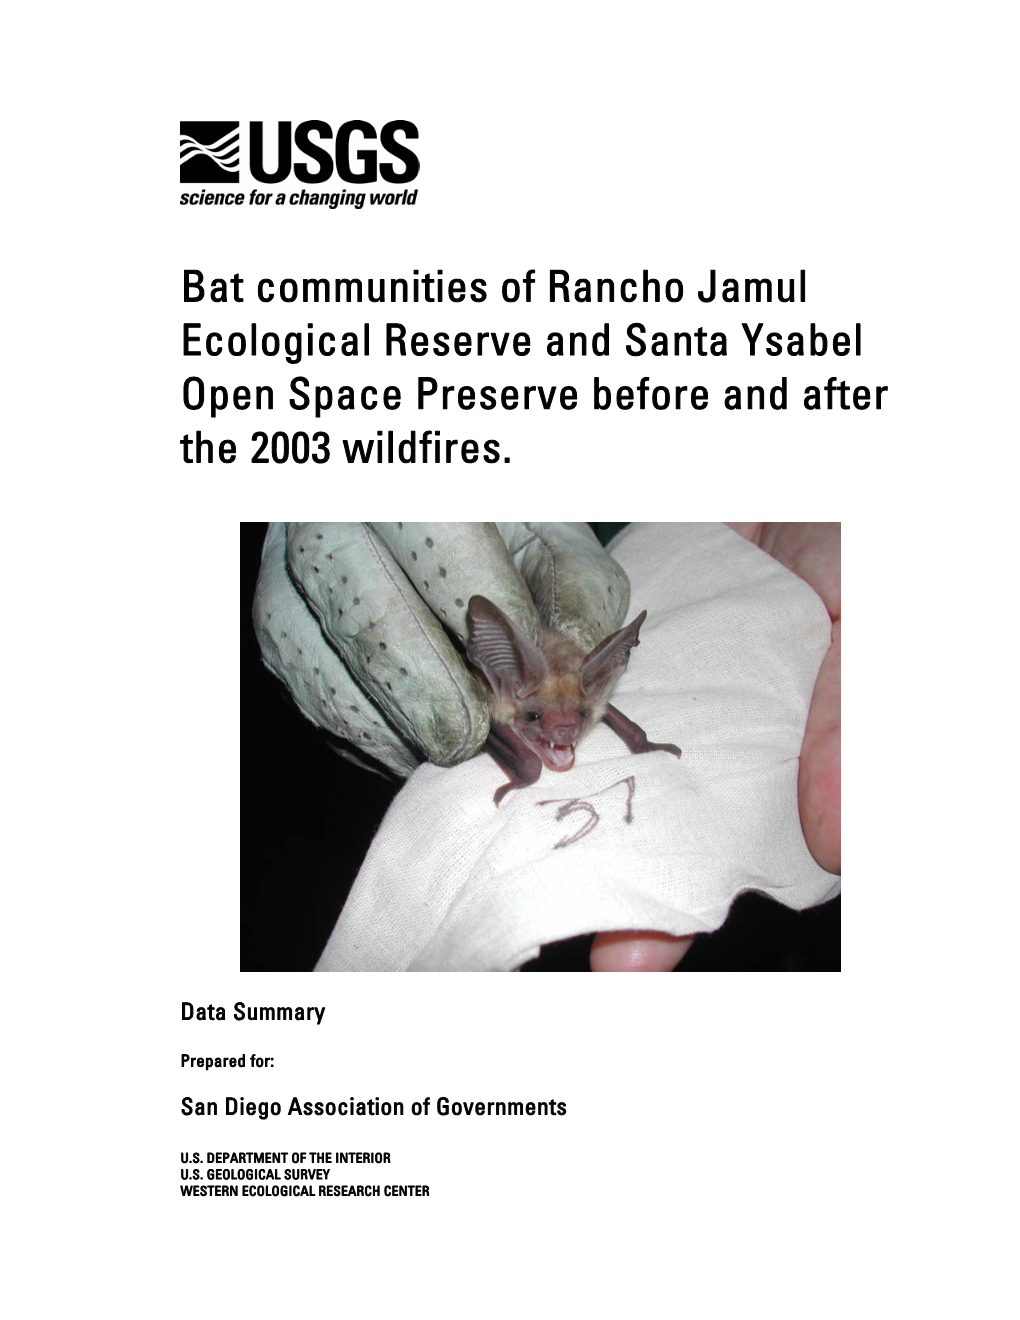 Bat Communities of Rancho Jamul Ecological Reserve and Santa Ysabel Open Space Preserve Before and After the 2003 Wildfires